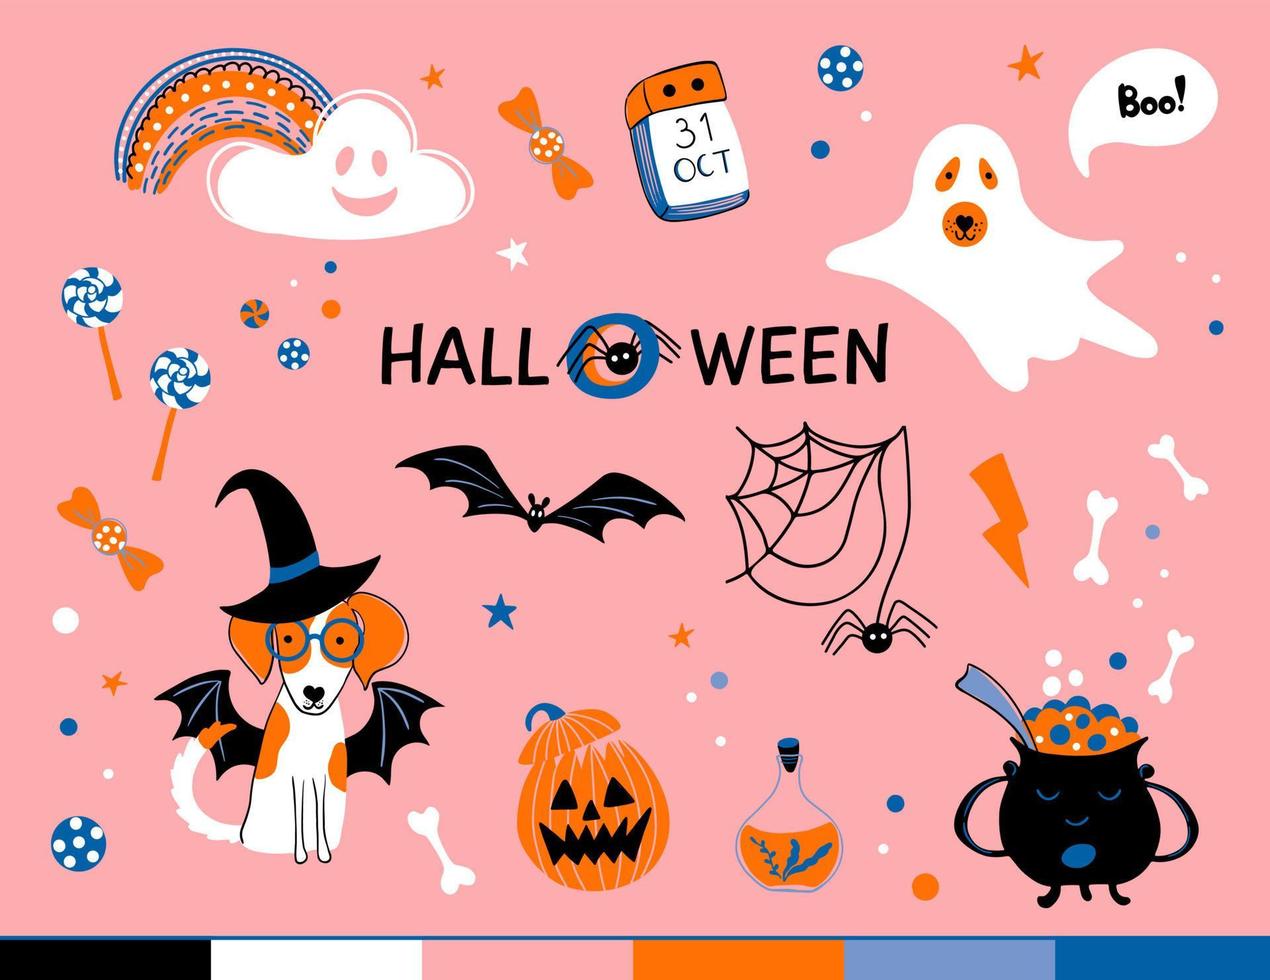 Set of characters and icons for Halloween in cartoon style for stickers, wallpaper, textiles. Vector illustrations with pumpkin, ghost, candy, and other elements. Dog in costume for Halloween party.